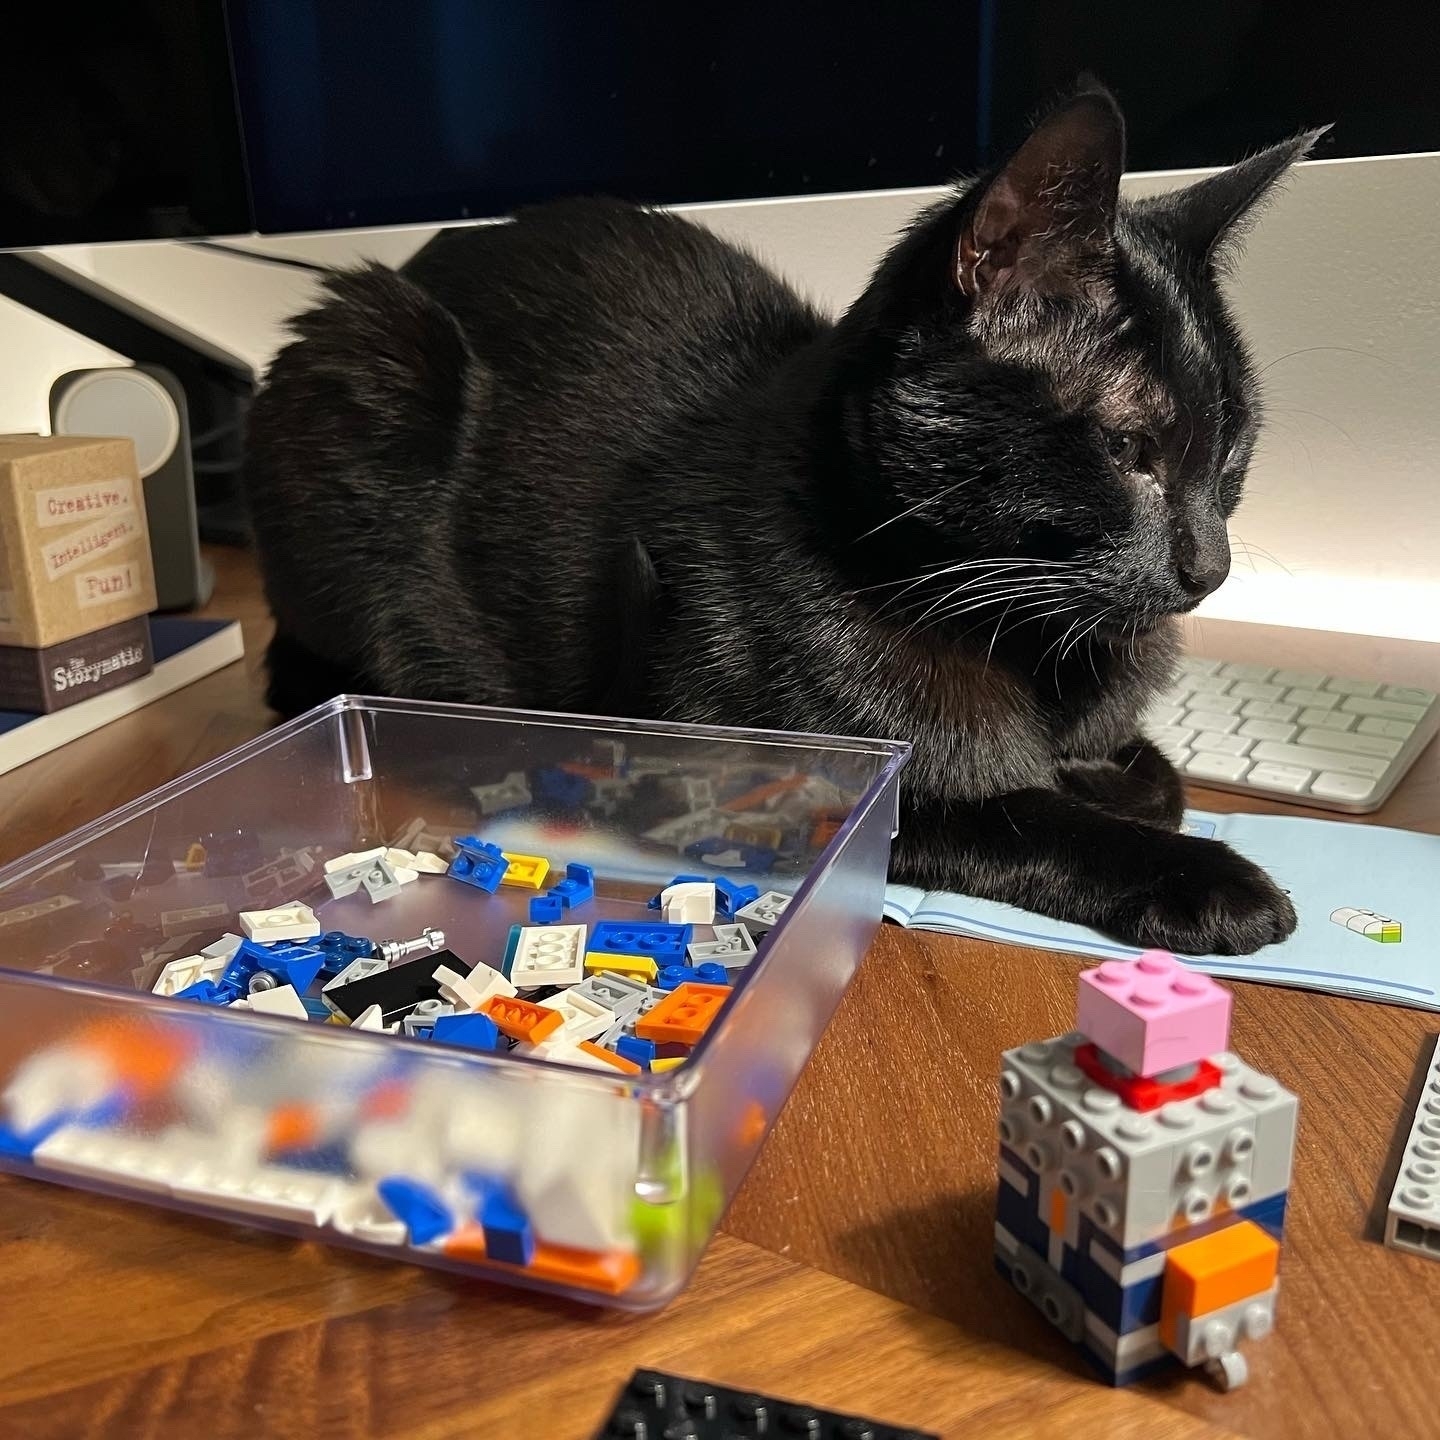 a black cat sits in the basground, behind a clear tray of loos LEGO and a partialky-built Brick Headz figure.